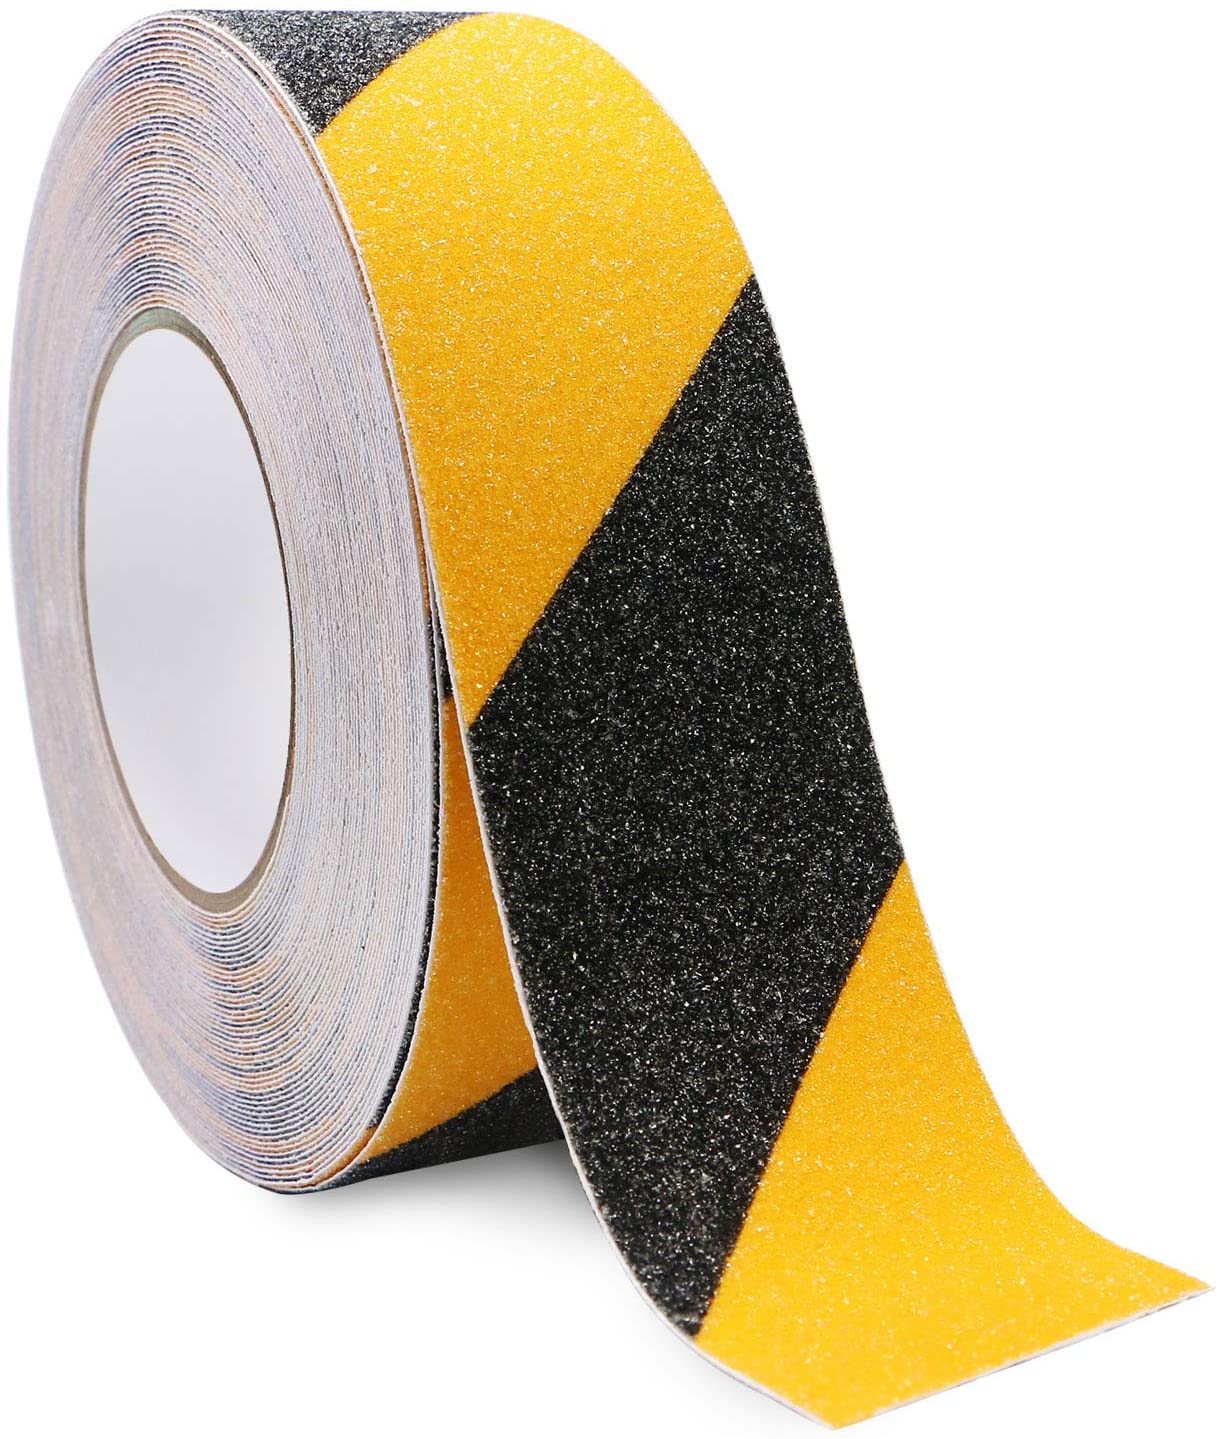 Anti-Slip Tape Outdoor Anti Slip Stickers High Friction Non Slip Traction  Tape Abrasive Adhesive for Stairs Safety Tread Step